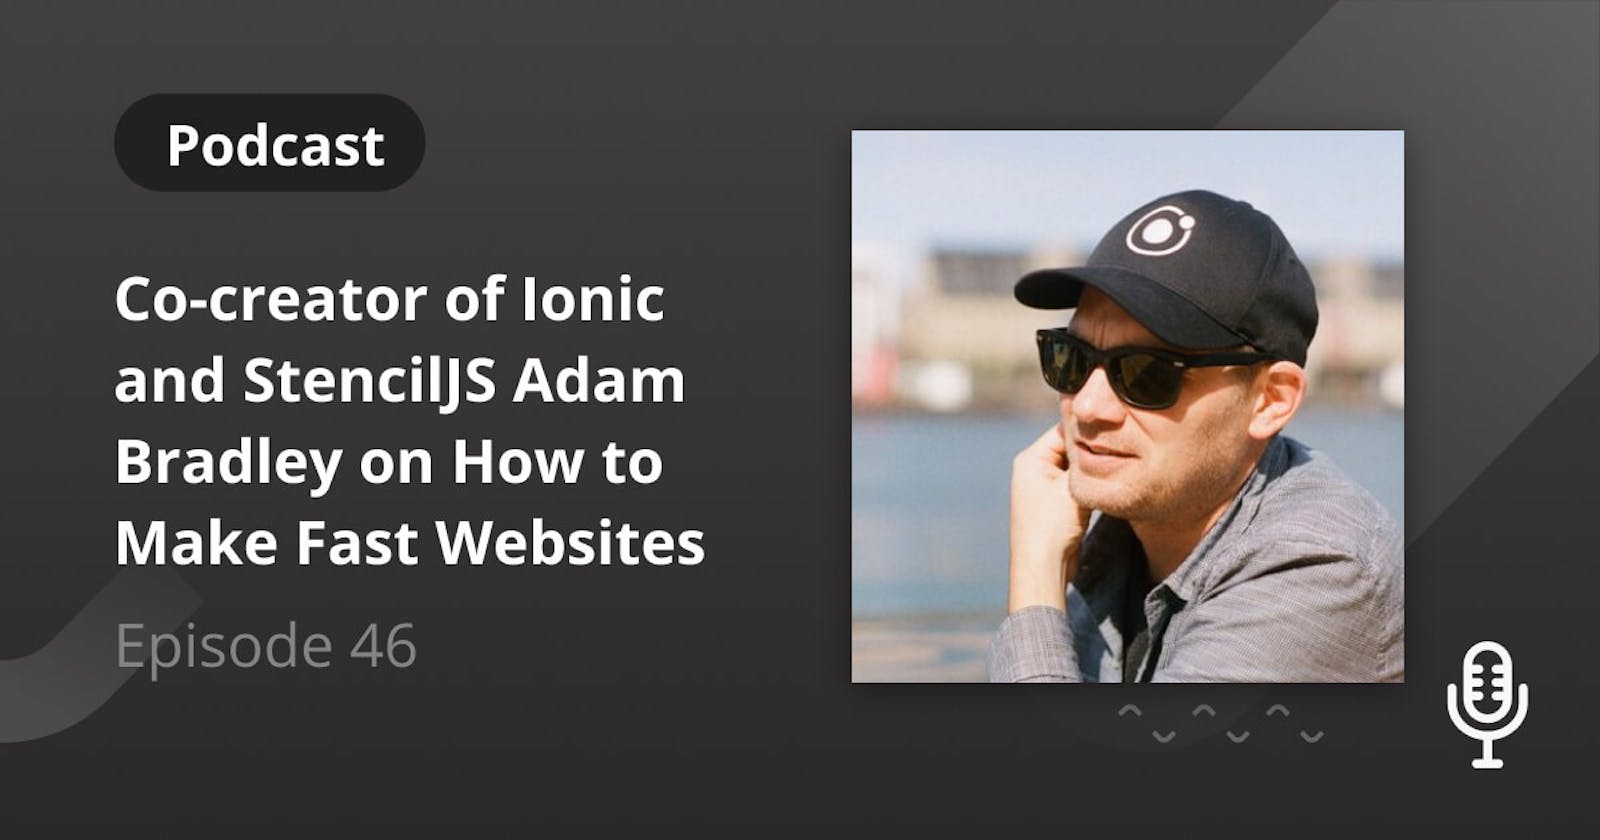 Co-creator of Ionic and Stencil Adam Bradley on How to Make Fast Websites